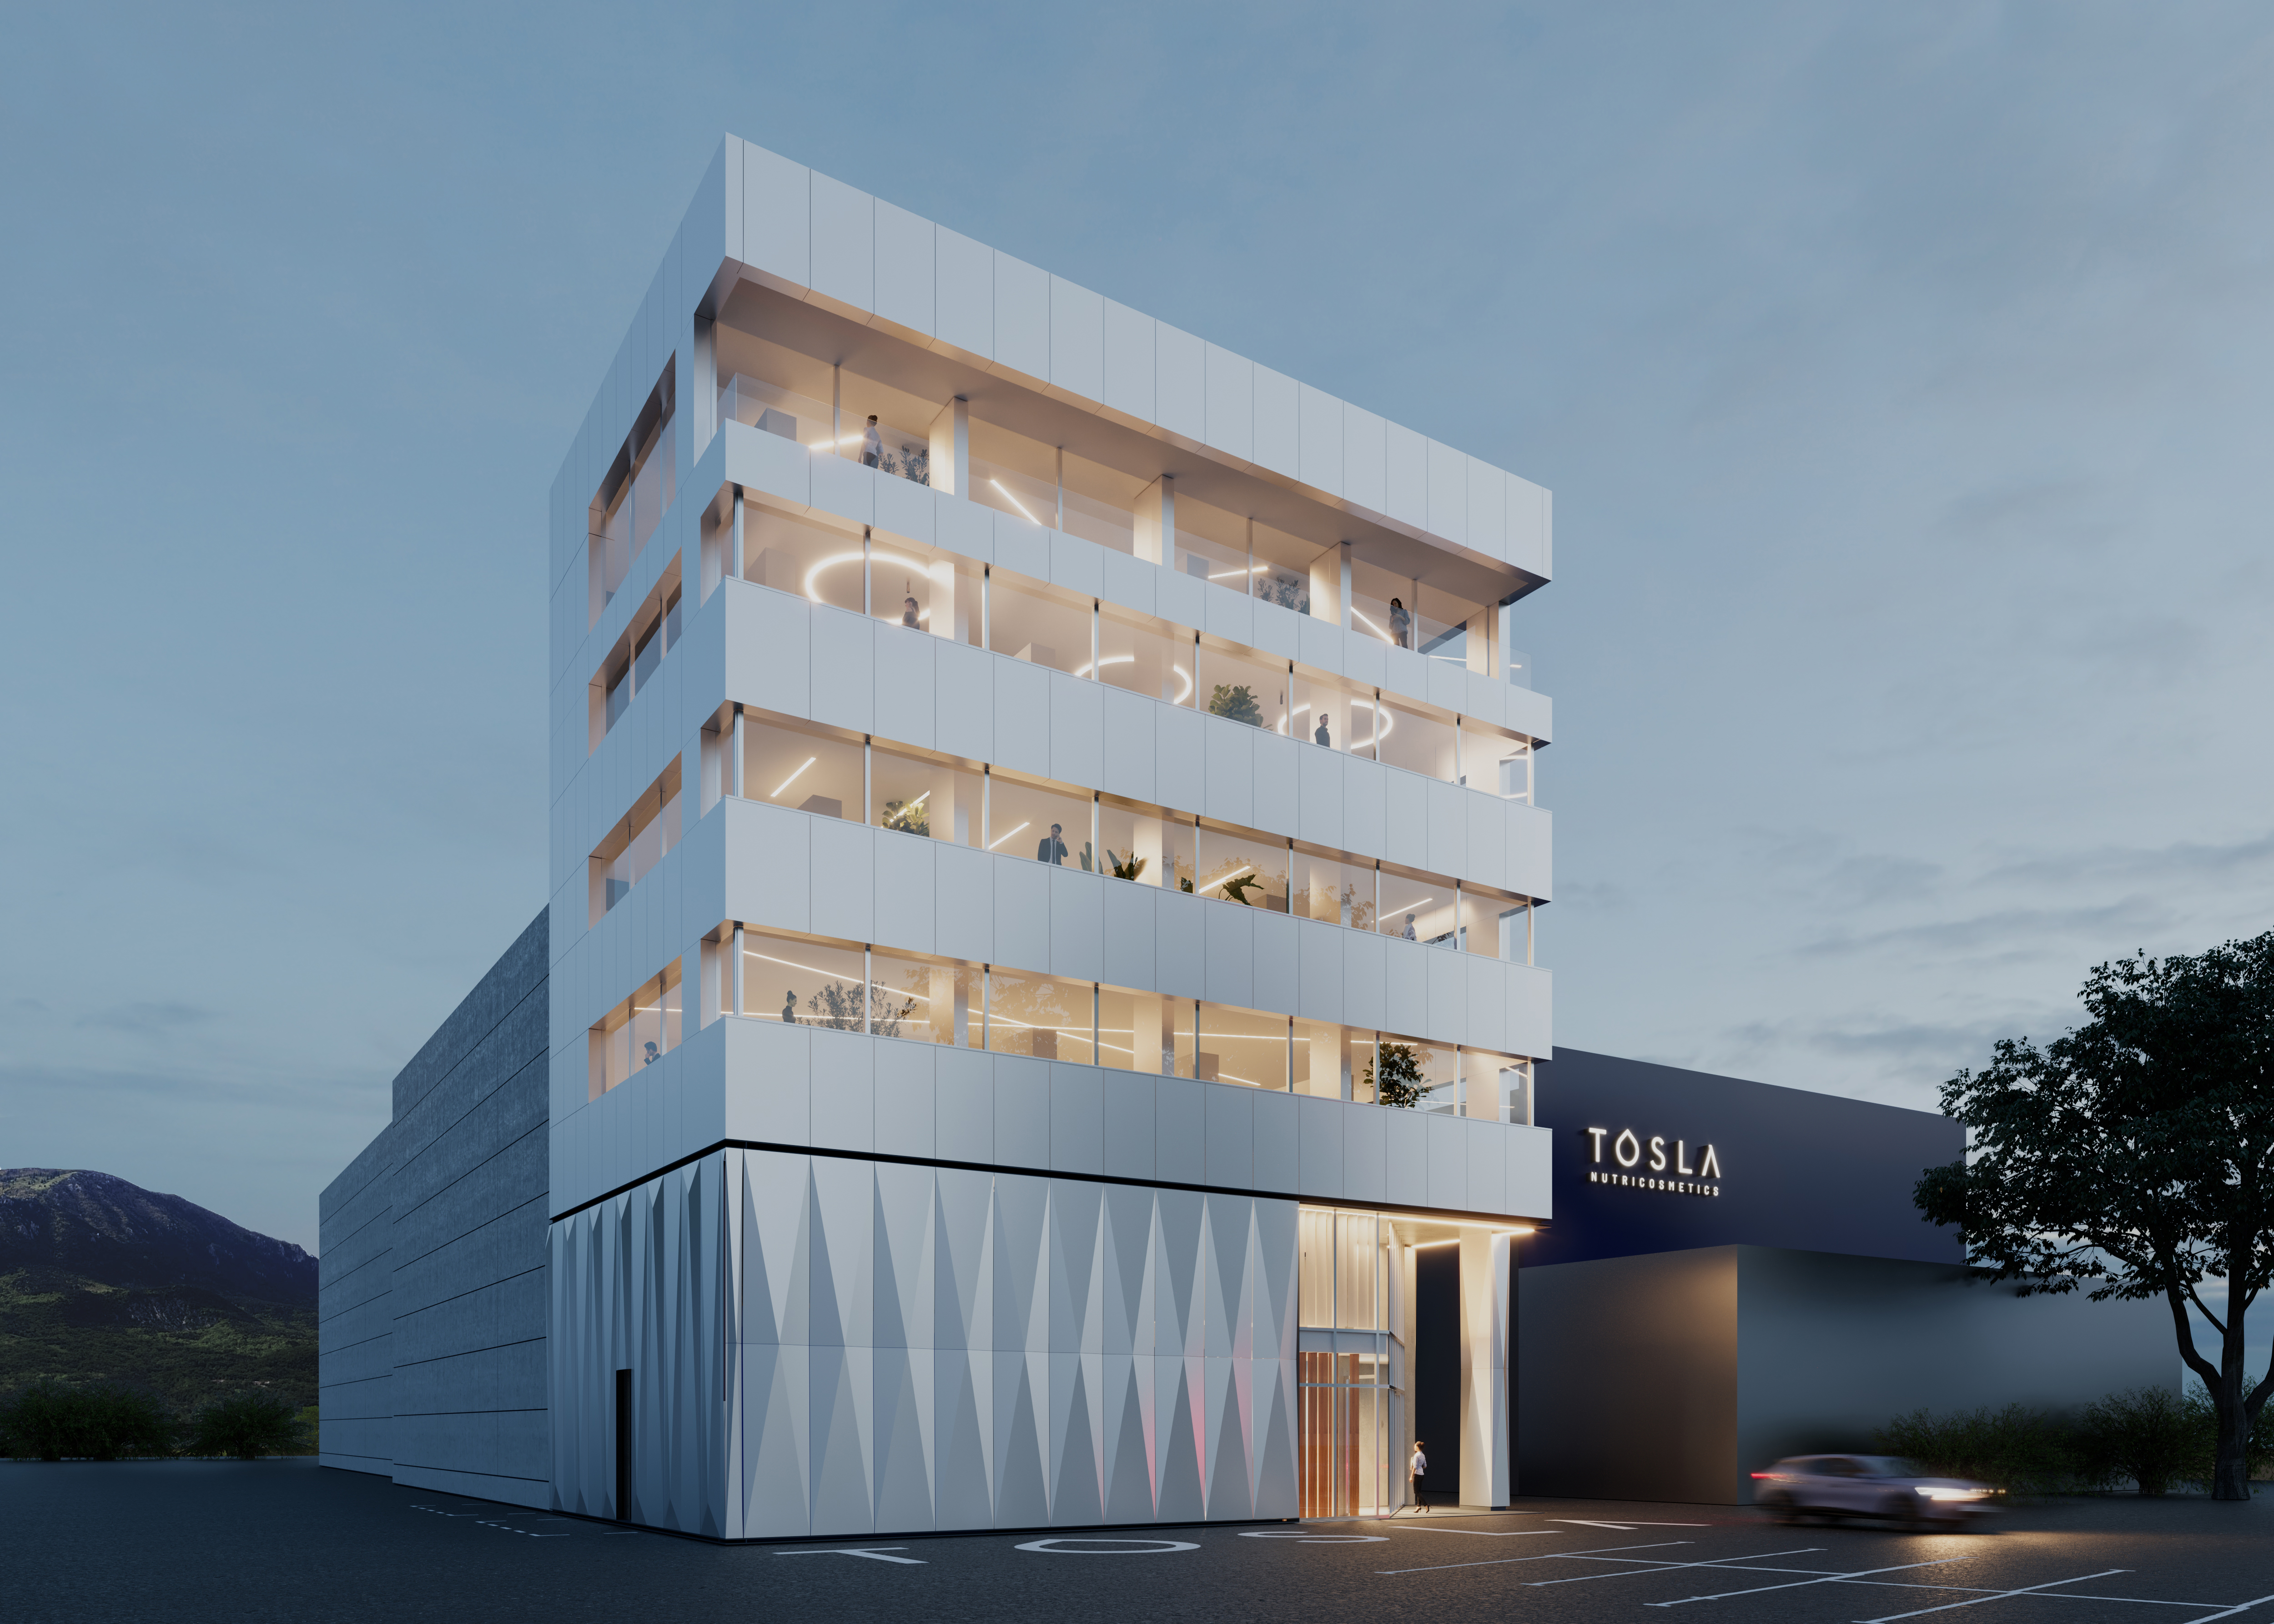 TOSLA Nutricosmetics announces new headquarters and superfactory in collaboration with Triiije Architects